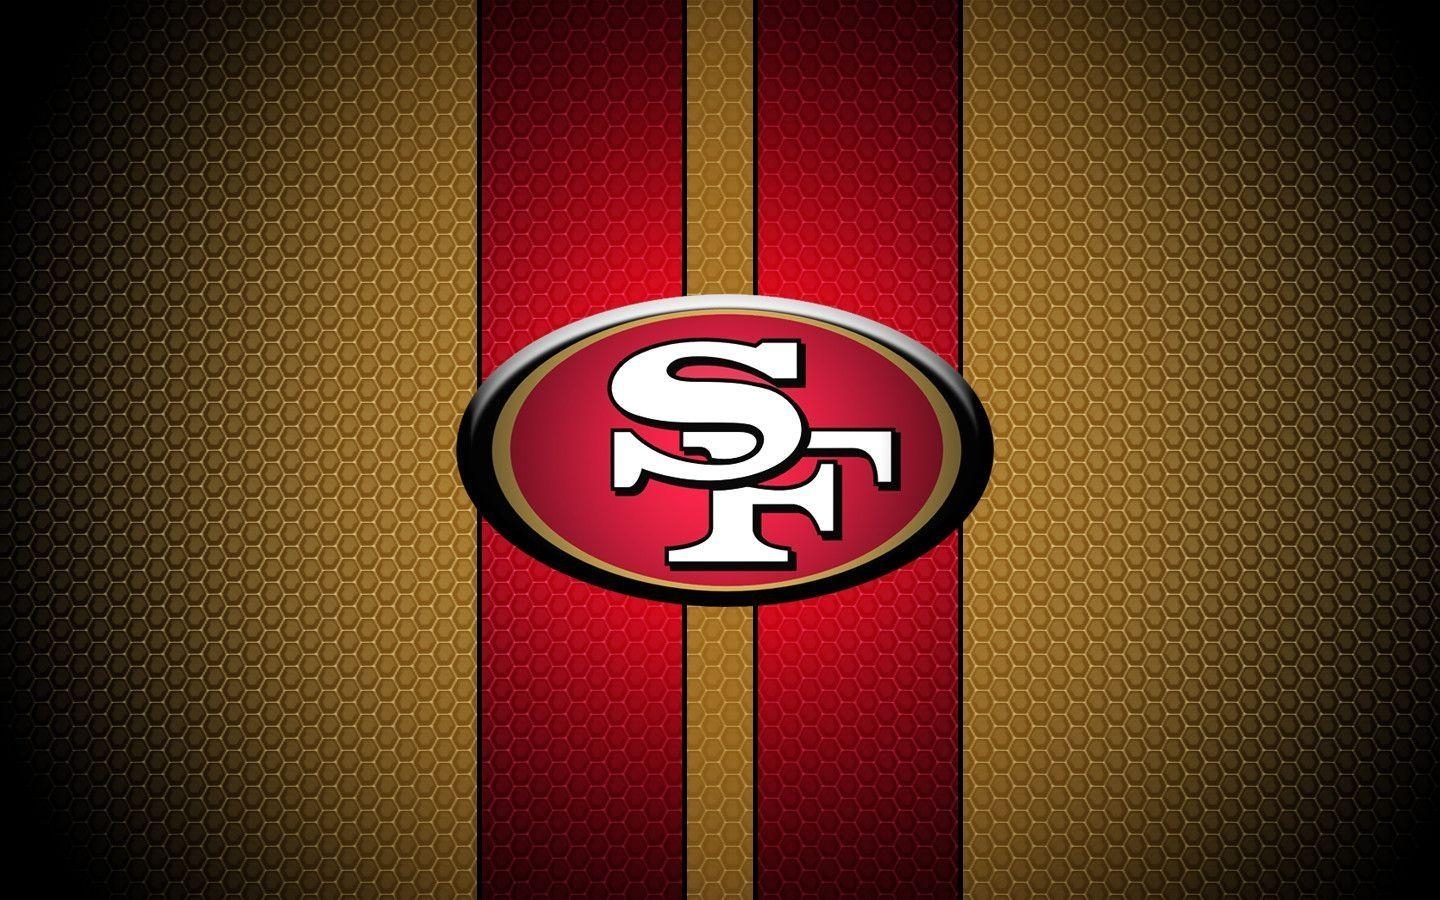 10 Top 49Ers Wallpaper For Android FULL HD 1920×1080 For PC Desktop